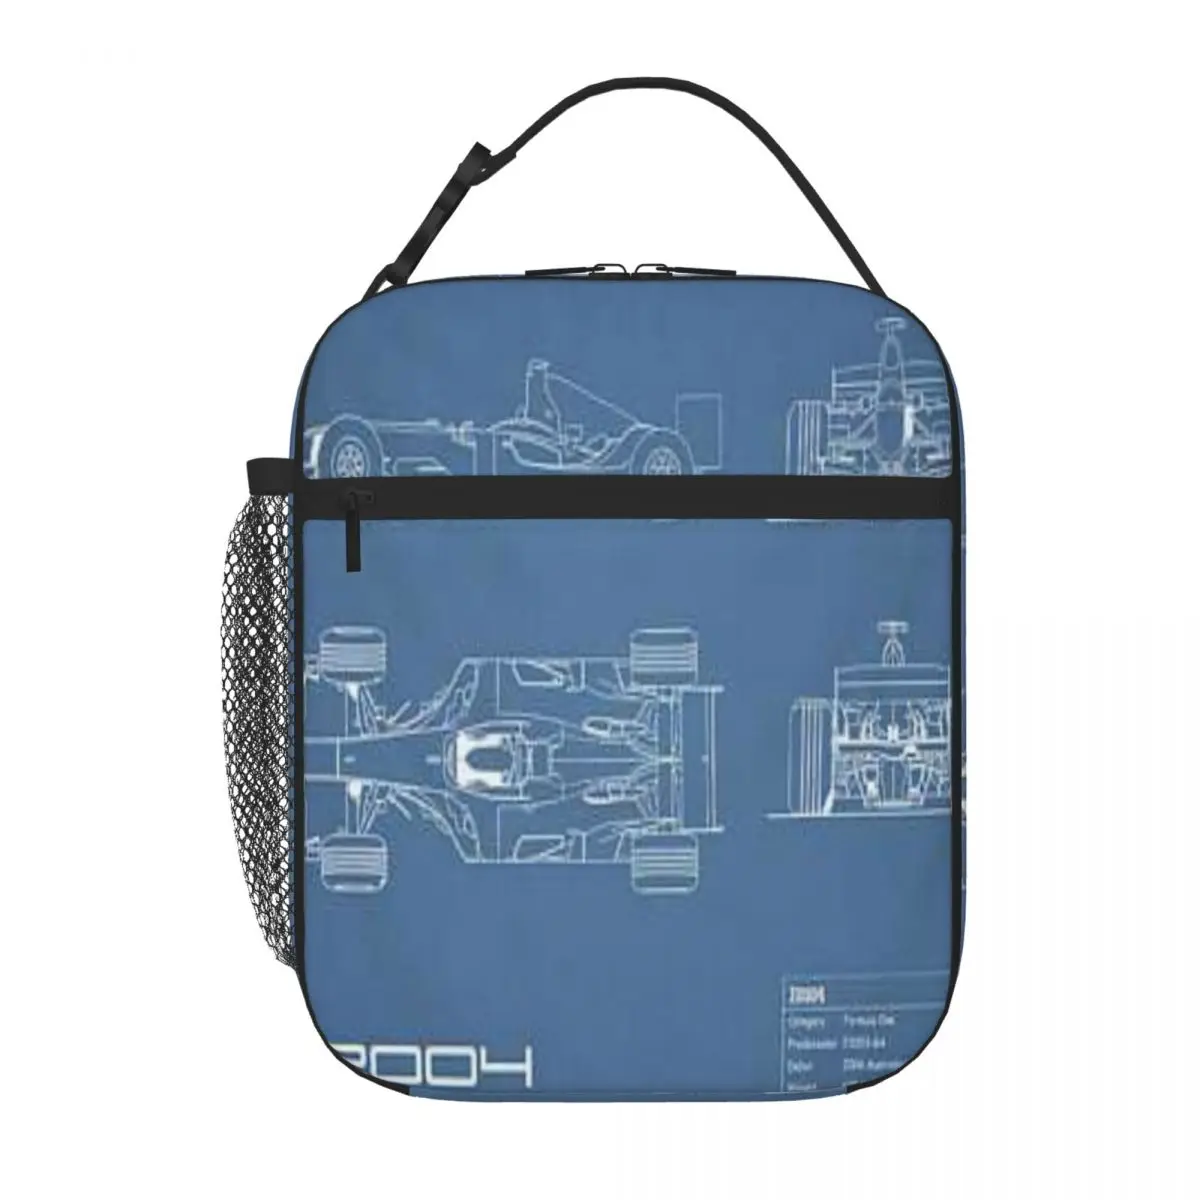 

The F2004 Gp Blueprint Mark Rogan Lunch Tote Lunchbox Insulation Bags Thermal Cooler Bag